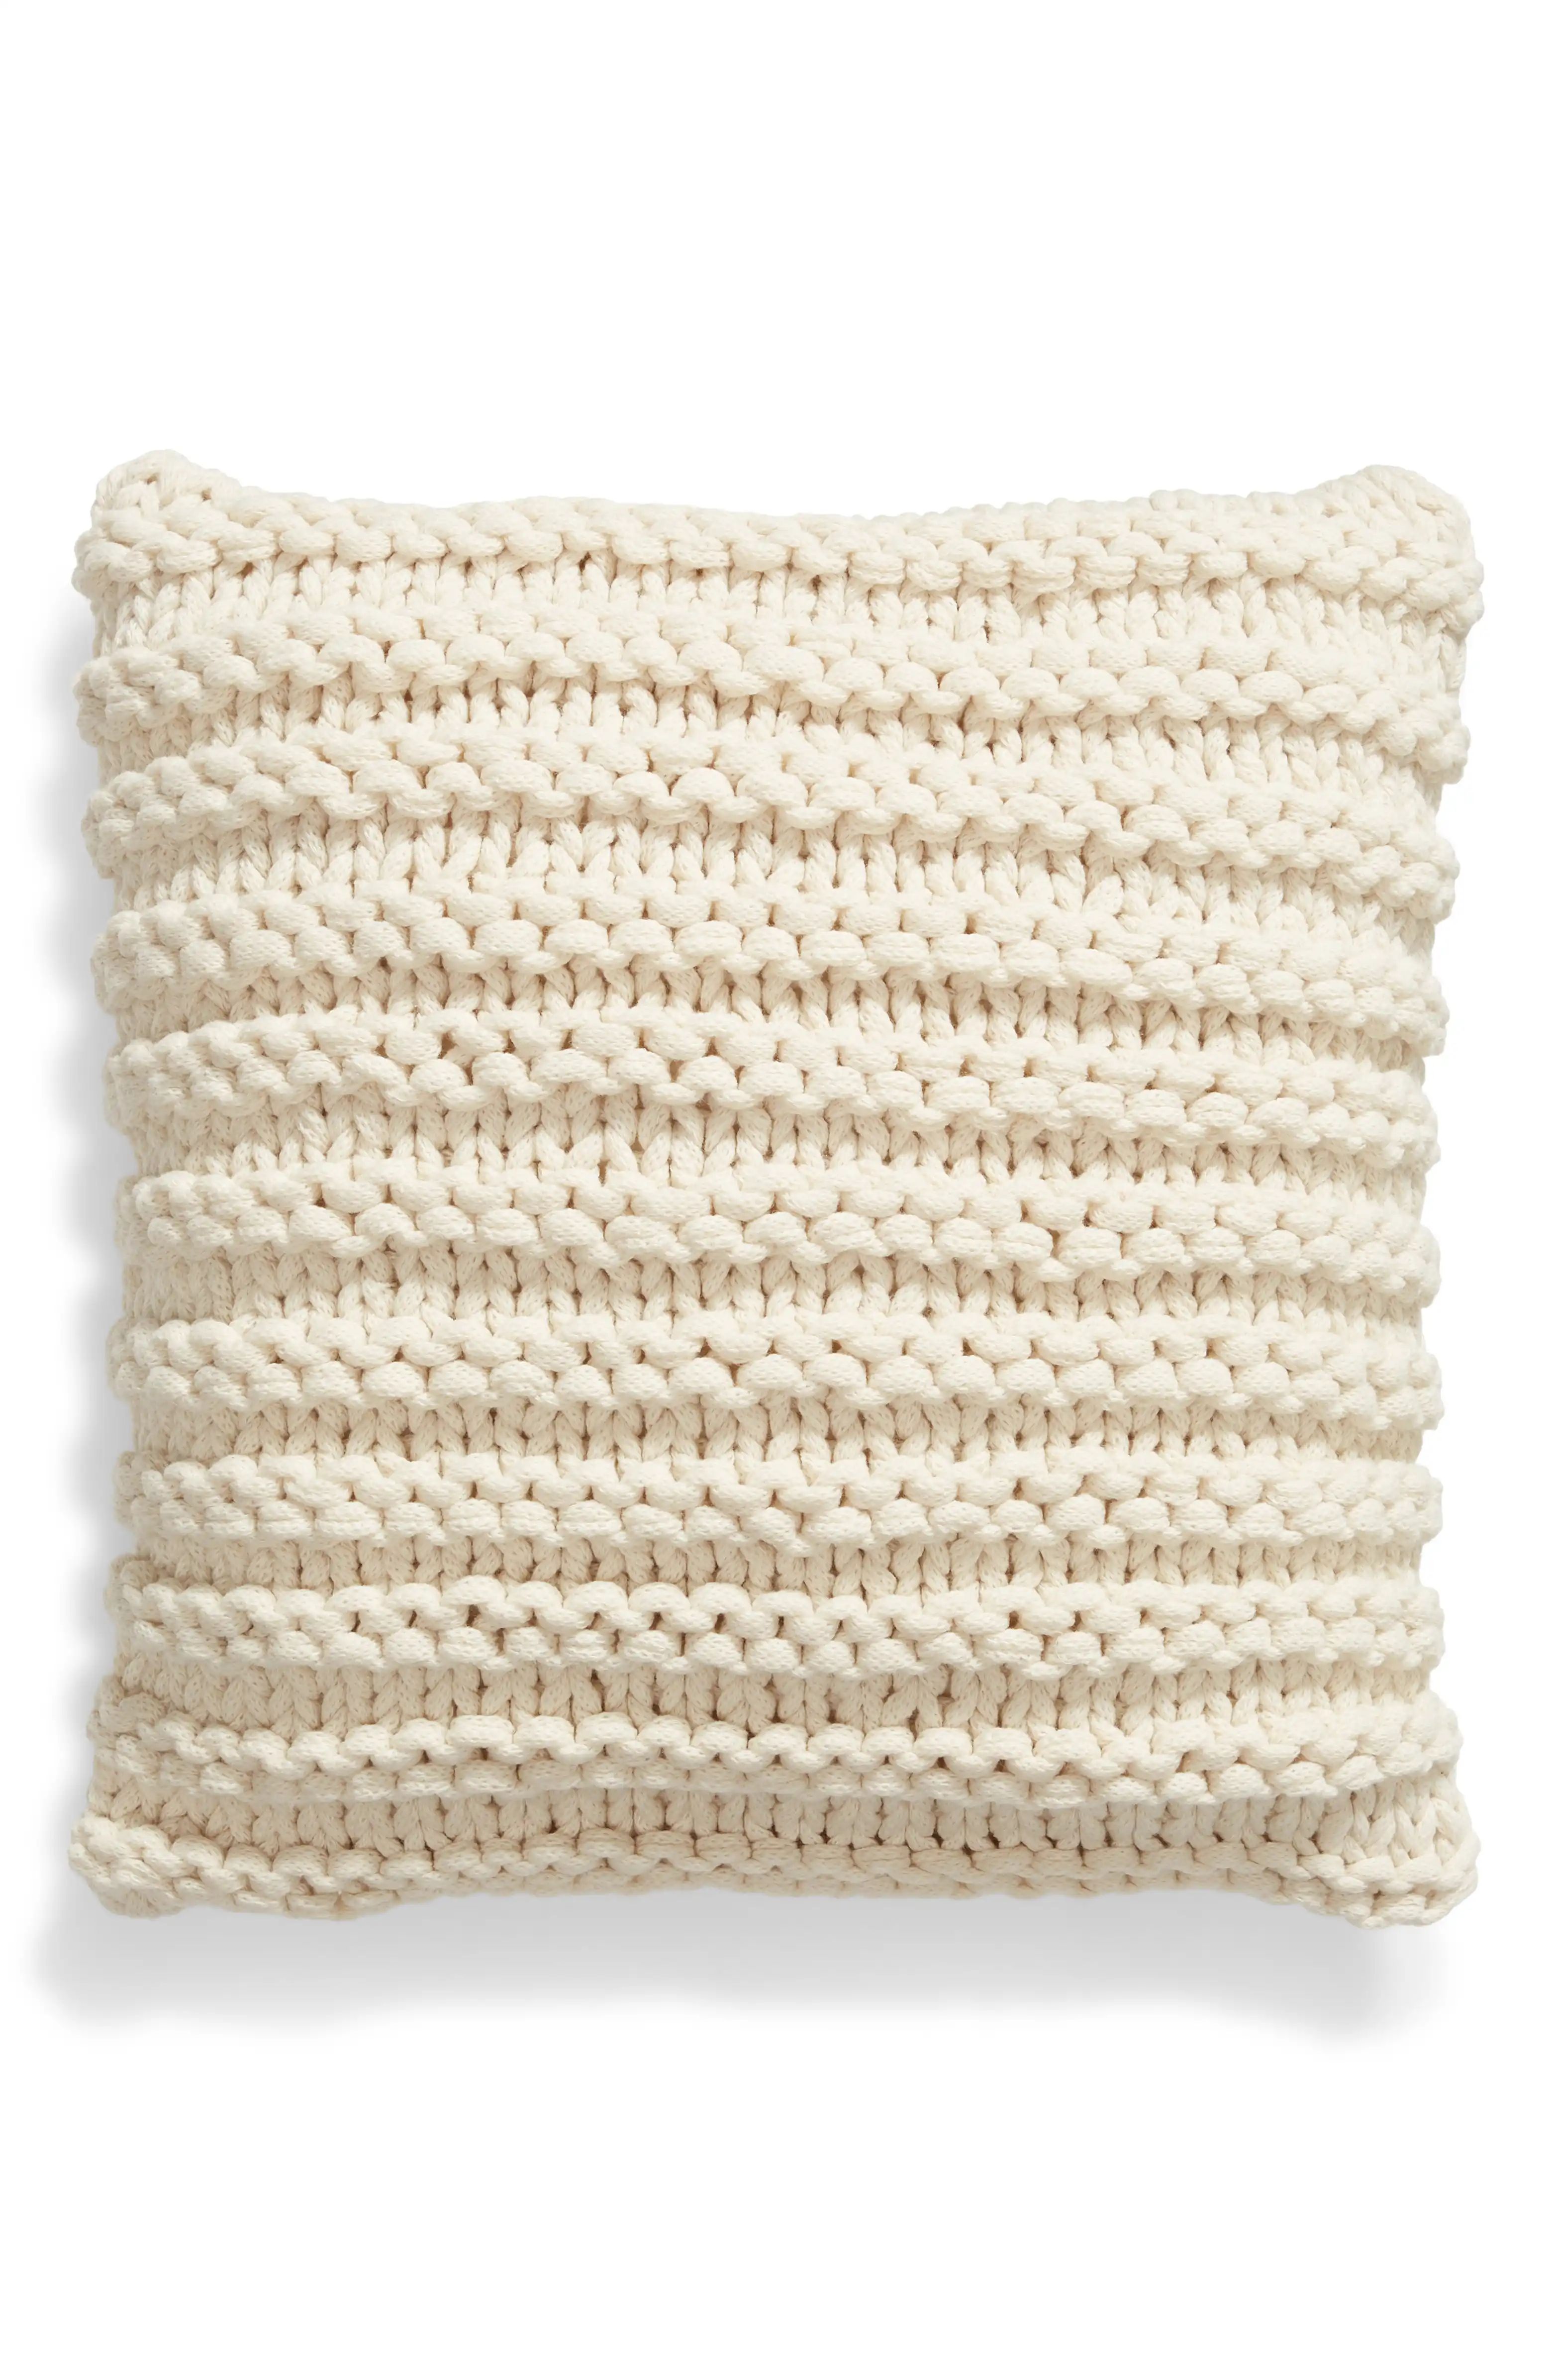 Chunky Knit Accent Pillow | Nordstrom